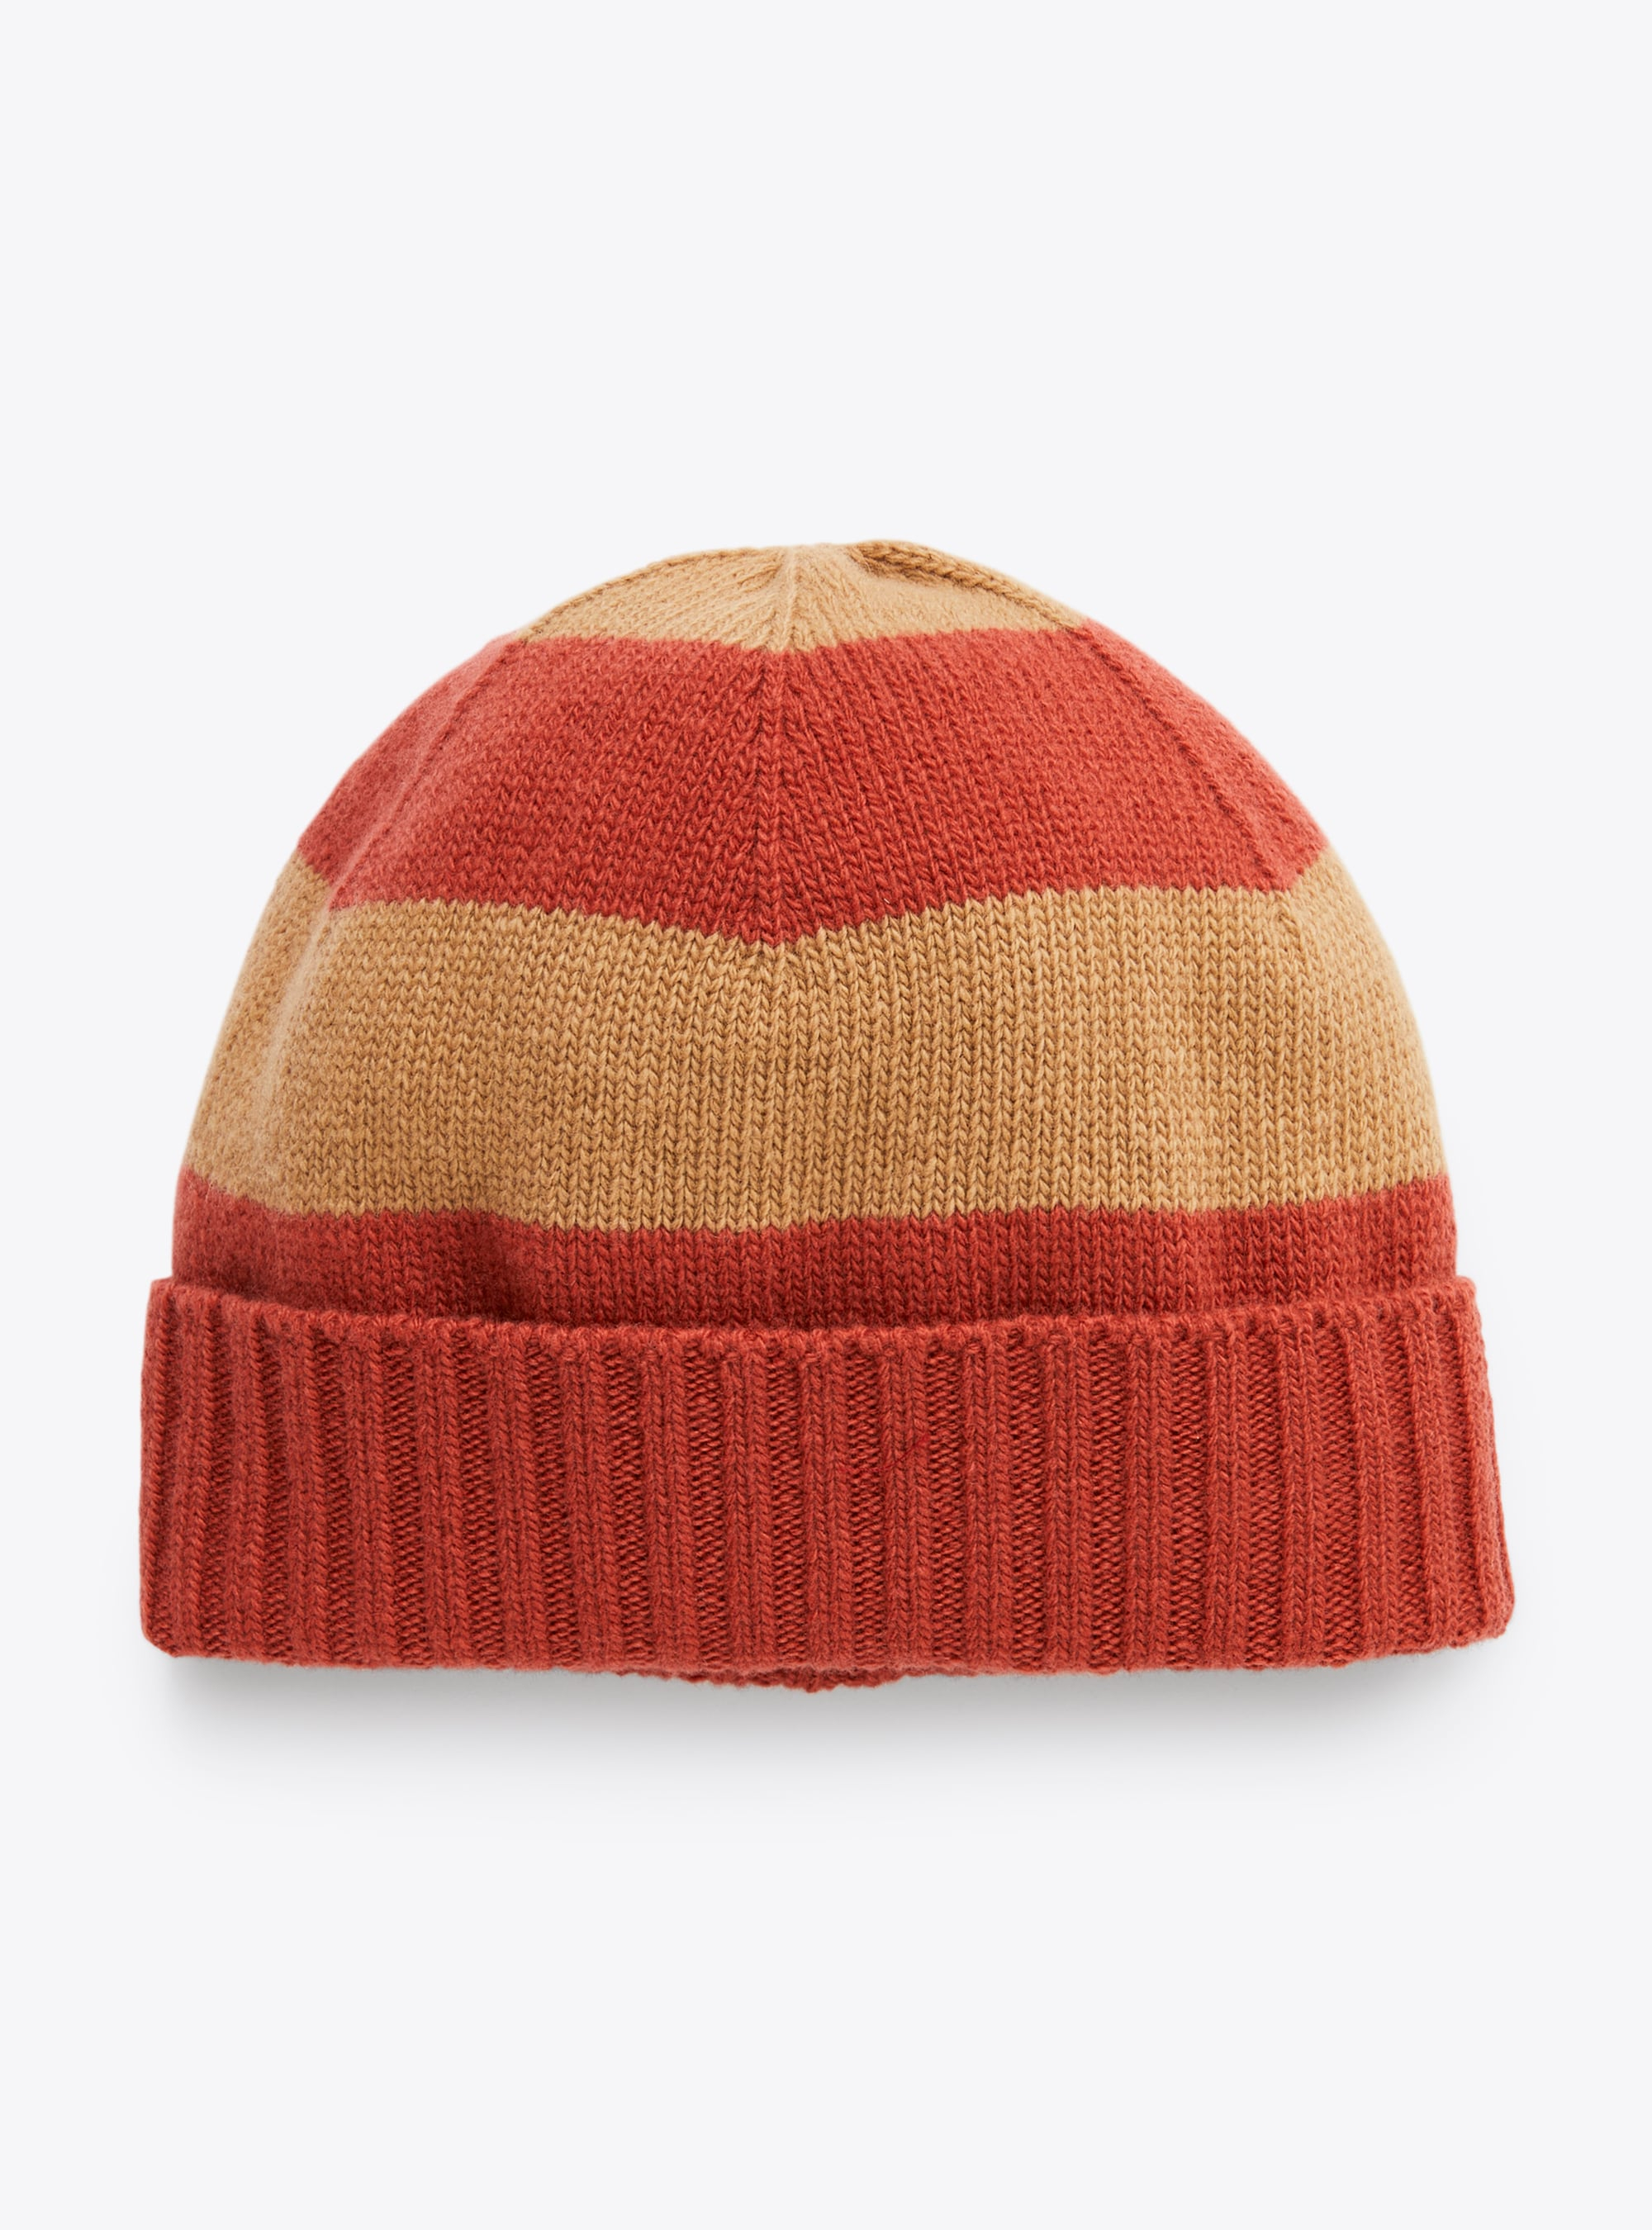 Tricot-knit hat in beige and brown stripes - Accessories - Il Gufo